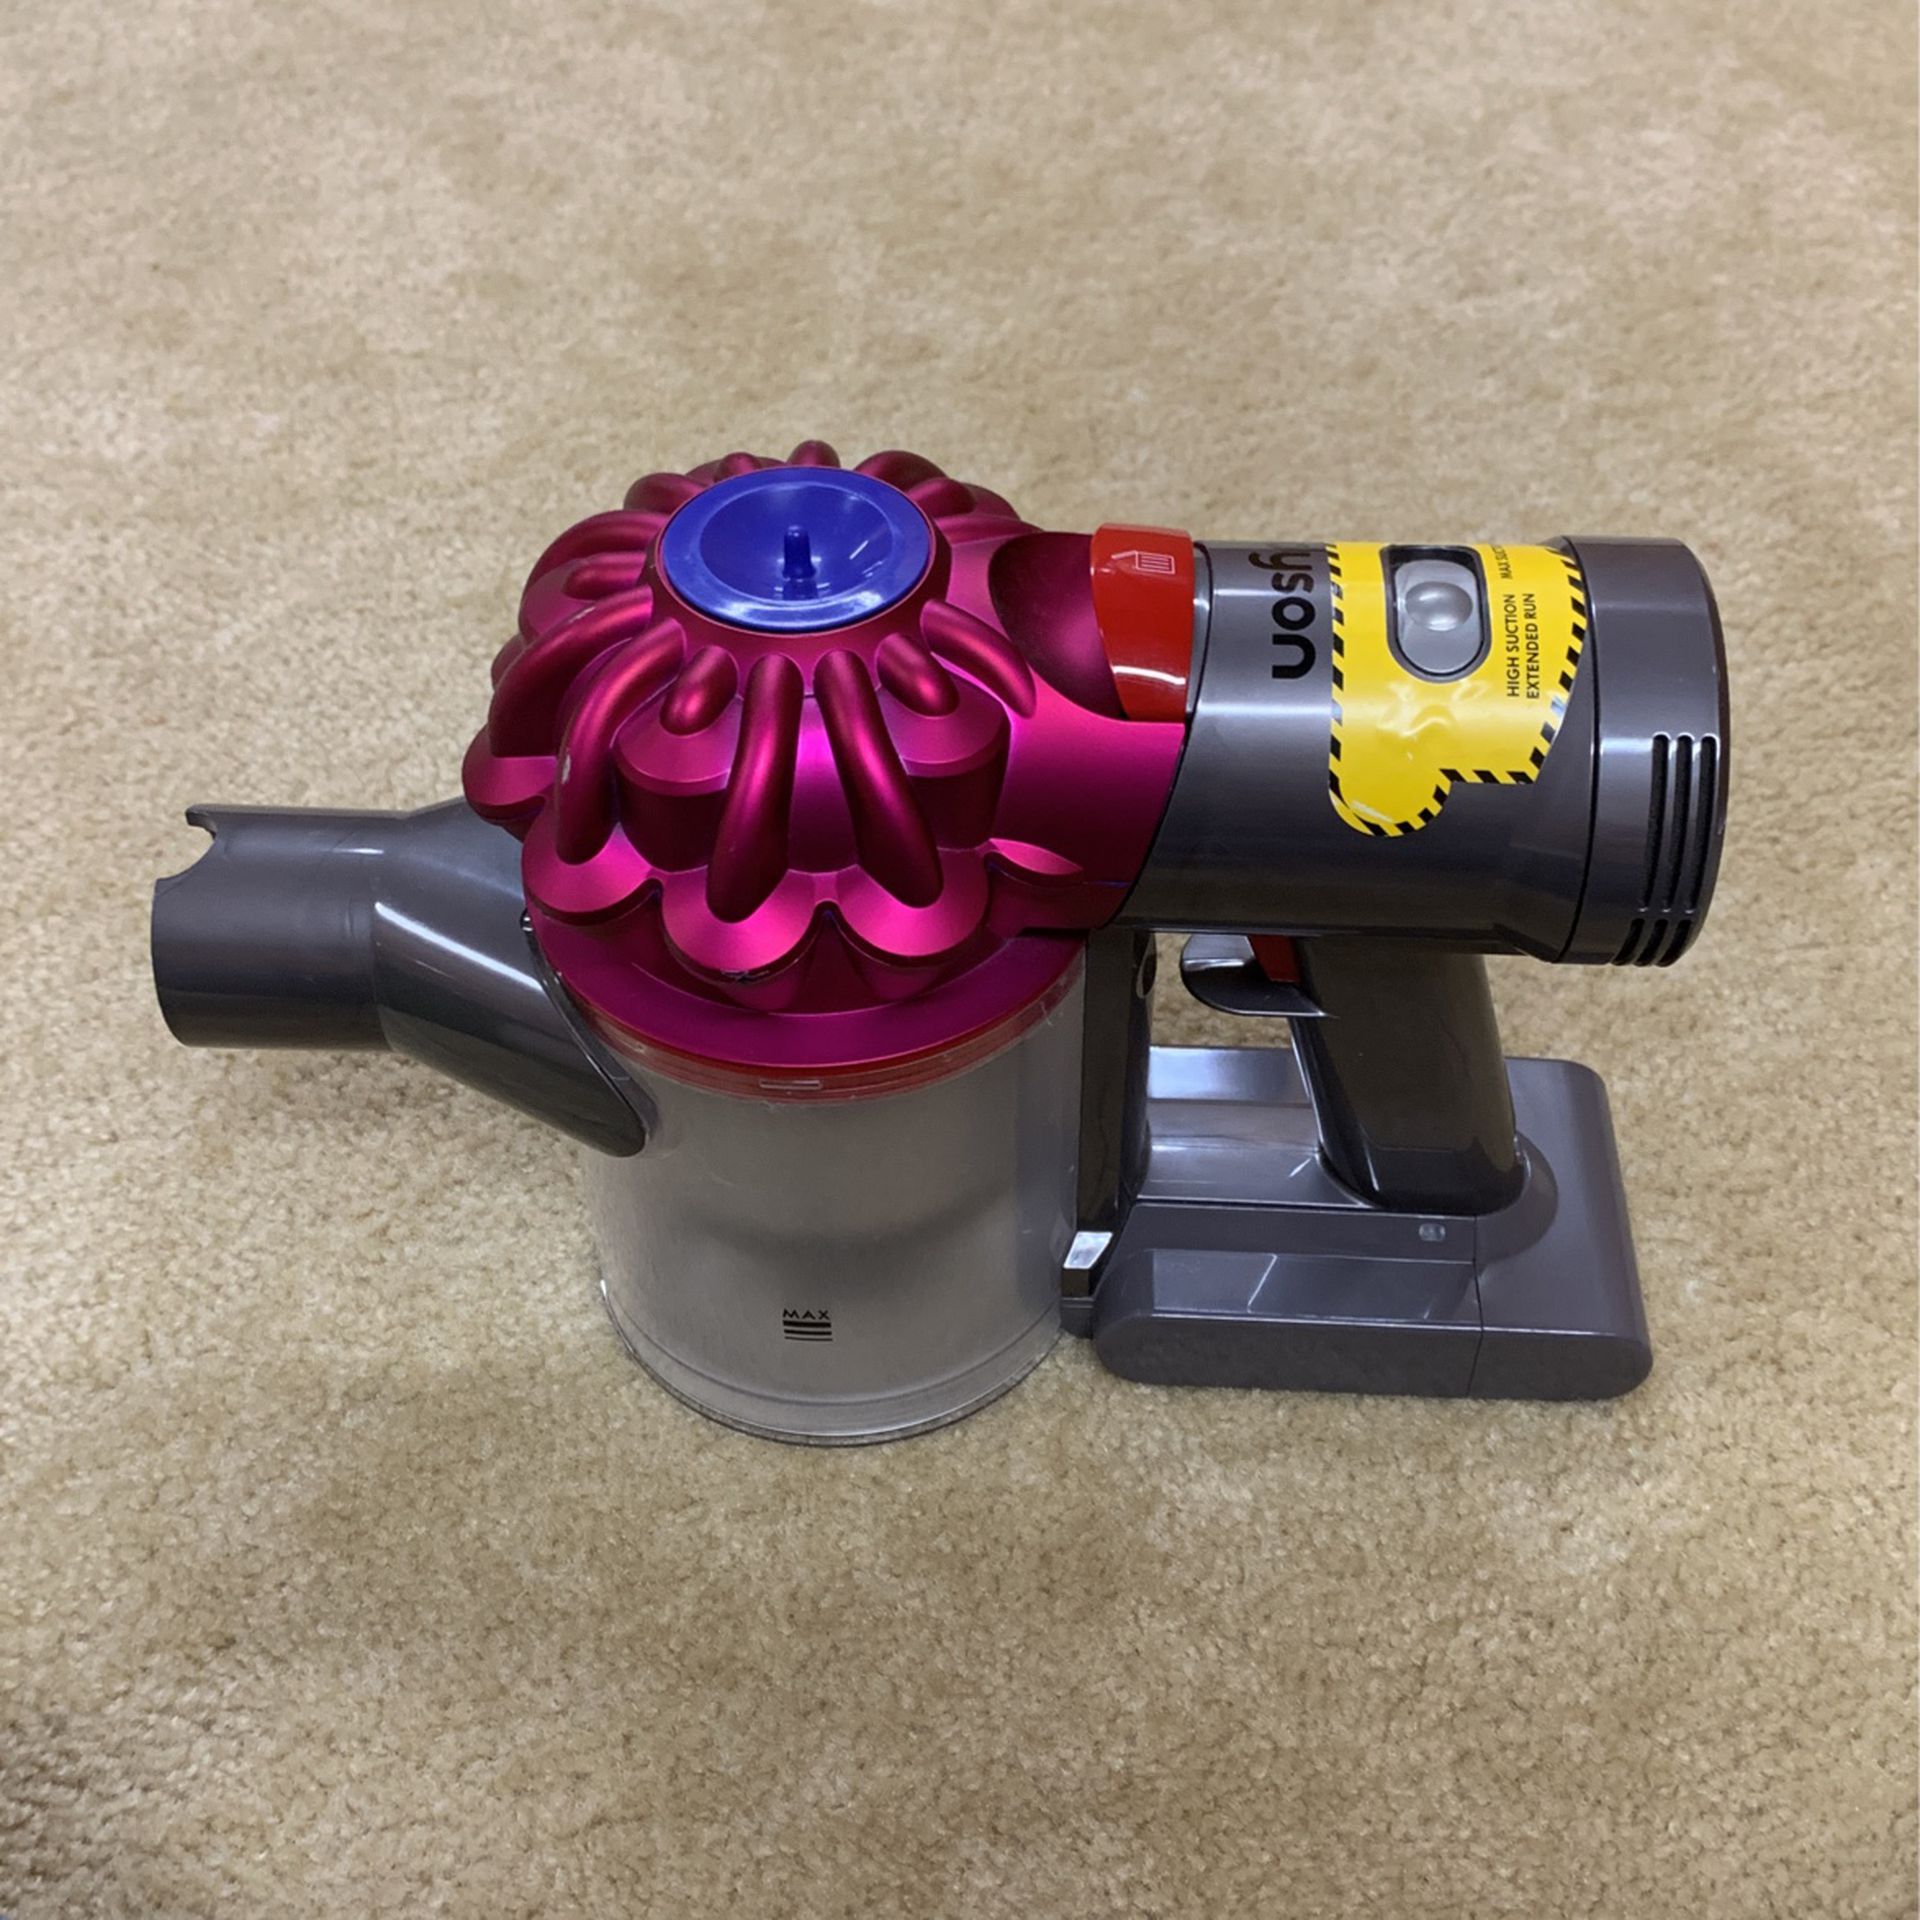 Vacuum cleaner Works Great Dyson